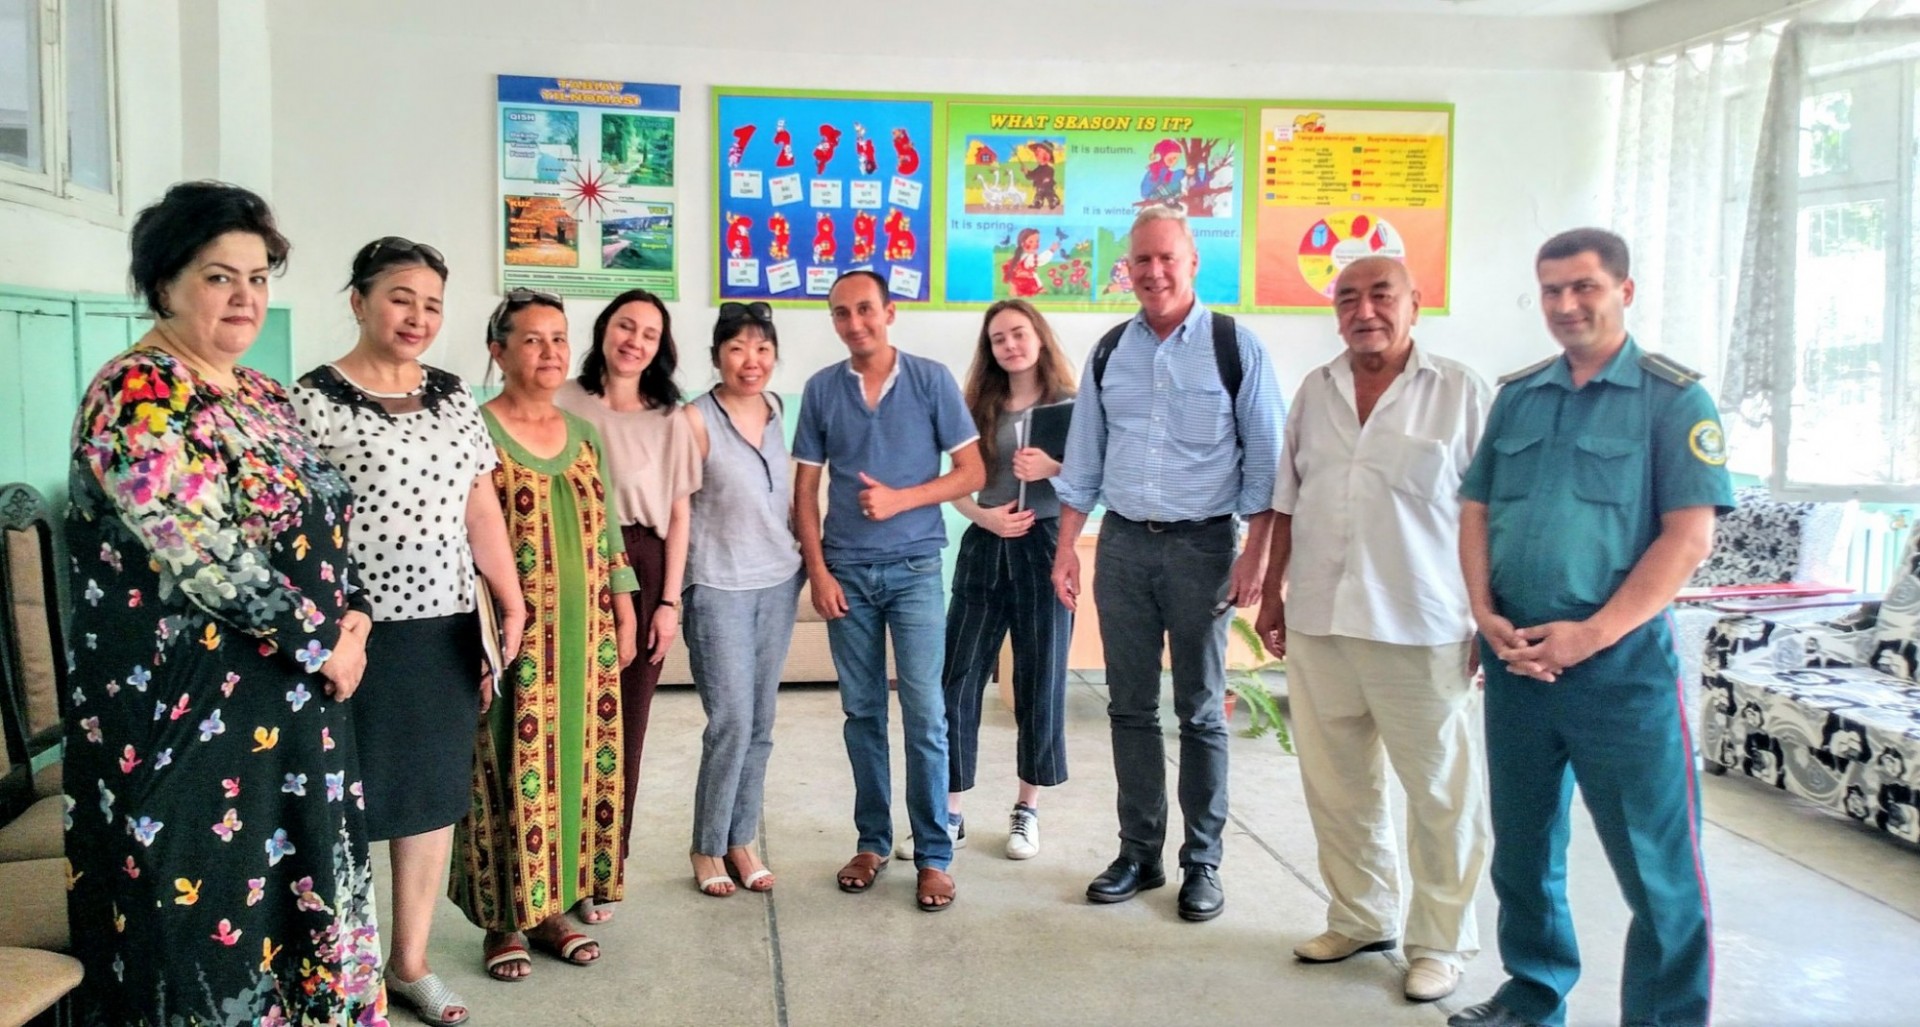 One group of community leaders collaborating on the project and sharing expertise in social service delivery using a community-level model called Mahallas. CSSW MSW grad Lyudmila Kim is pictured fifth from the left.